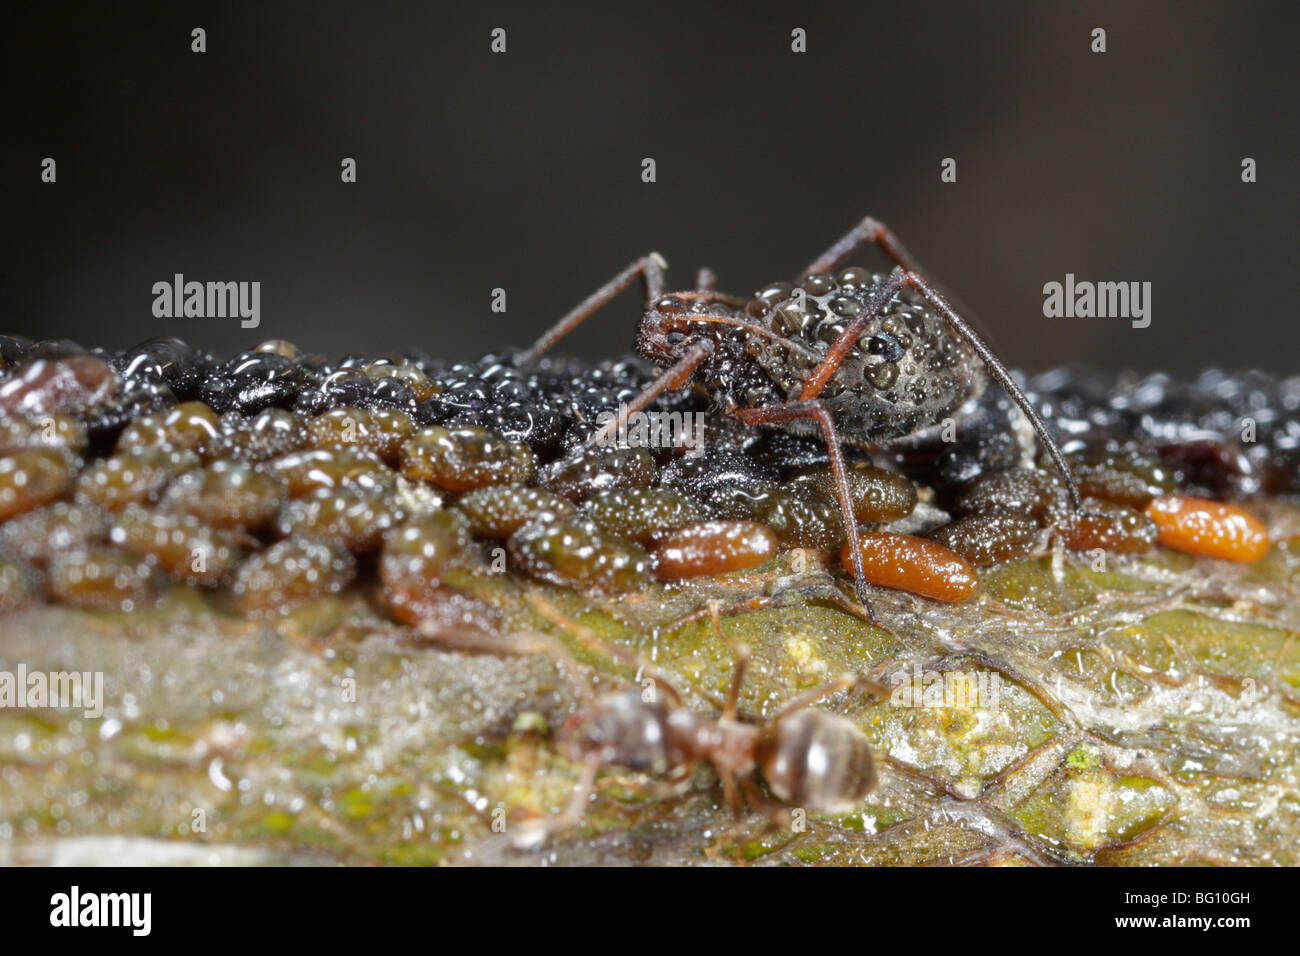 Aphids (Lachnus roboris) on an oak. They have laid eggs and are being guarded and milked by ants (Lasius niger) Dew covers them Stock Photo